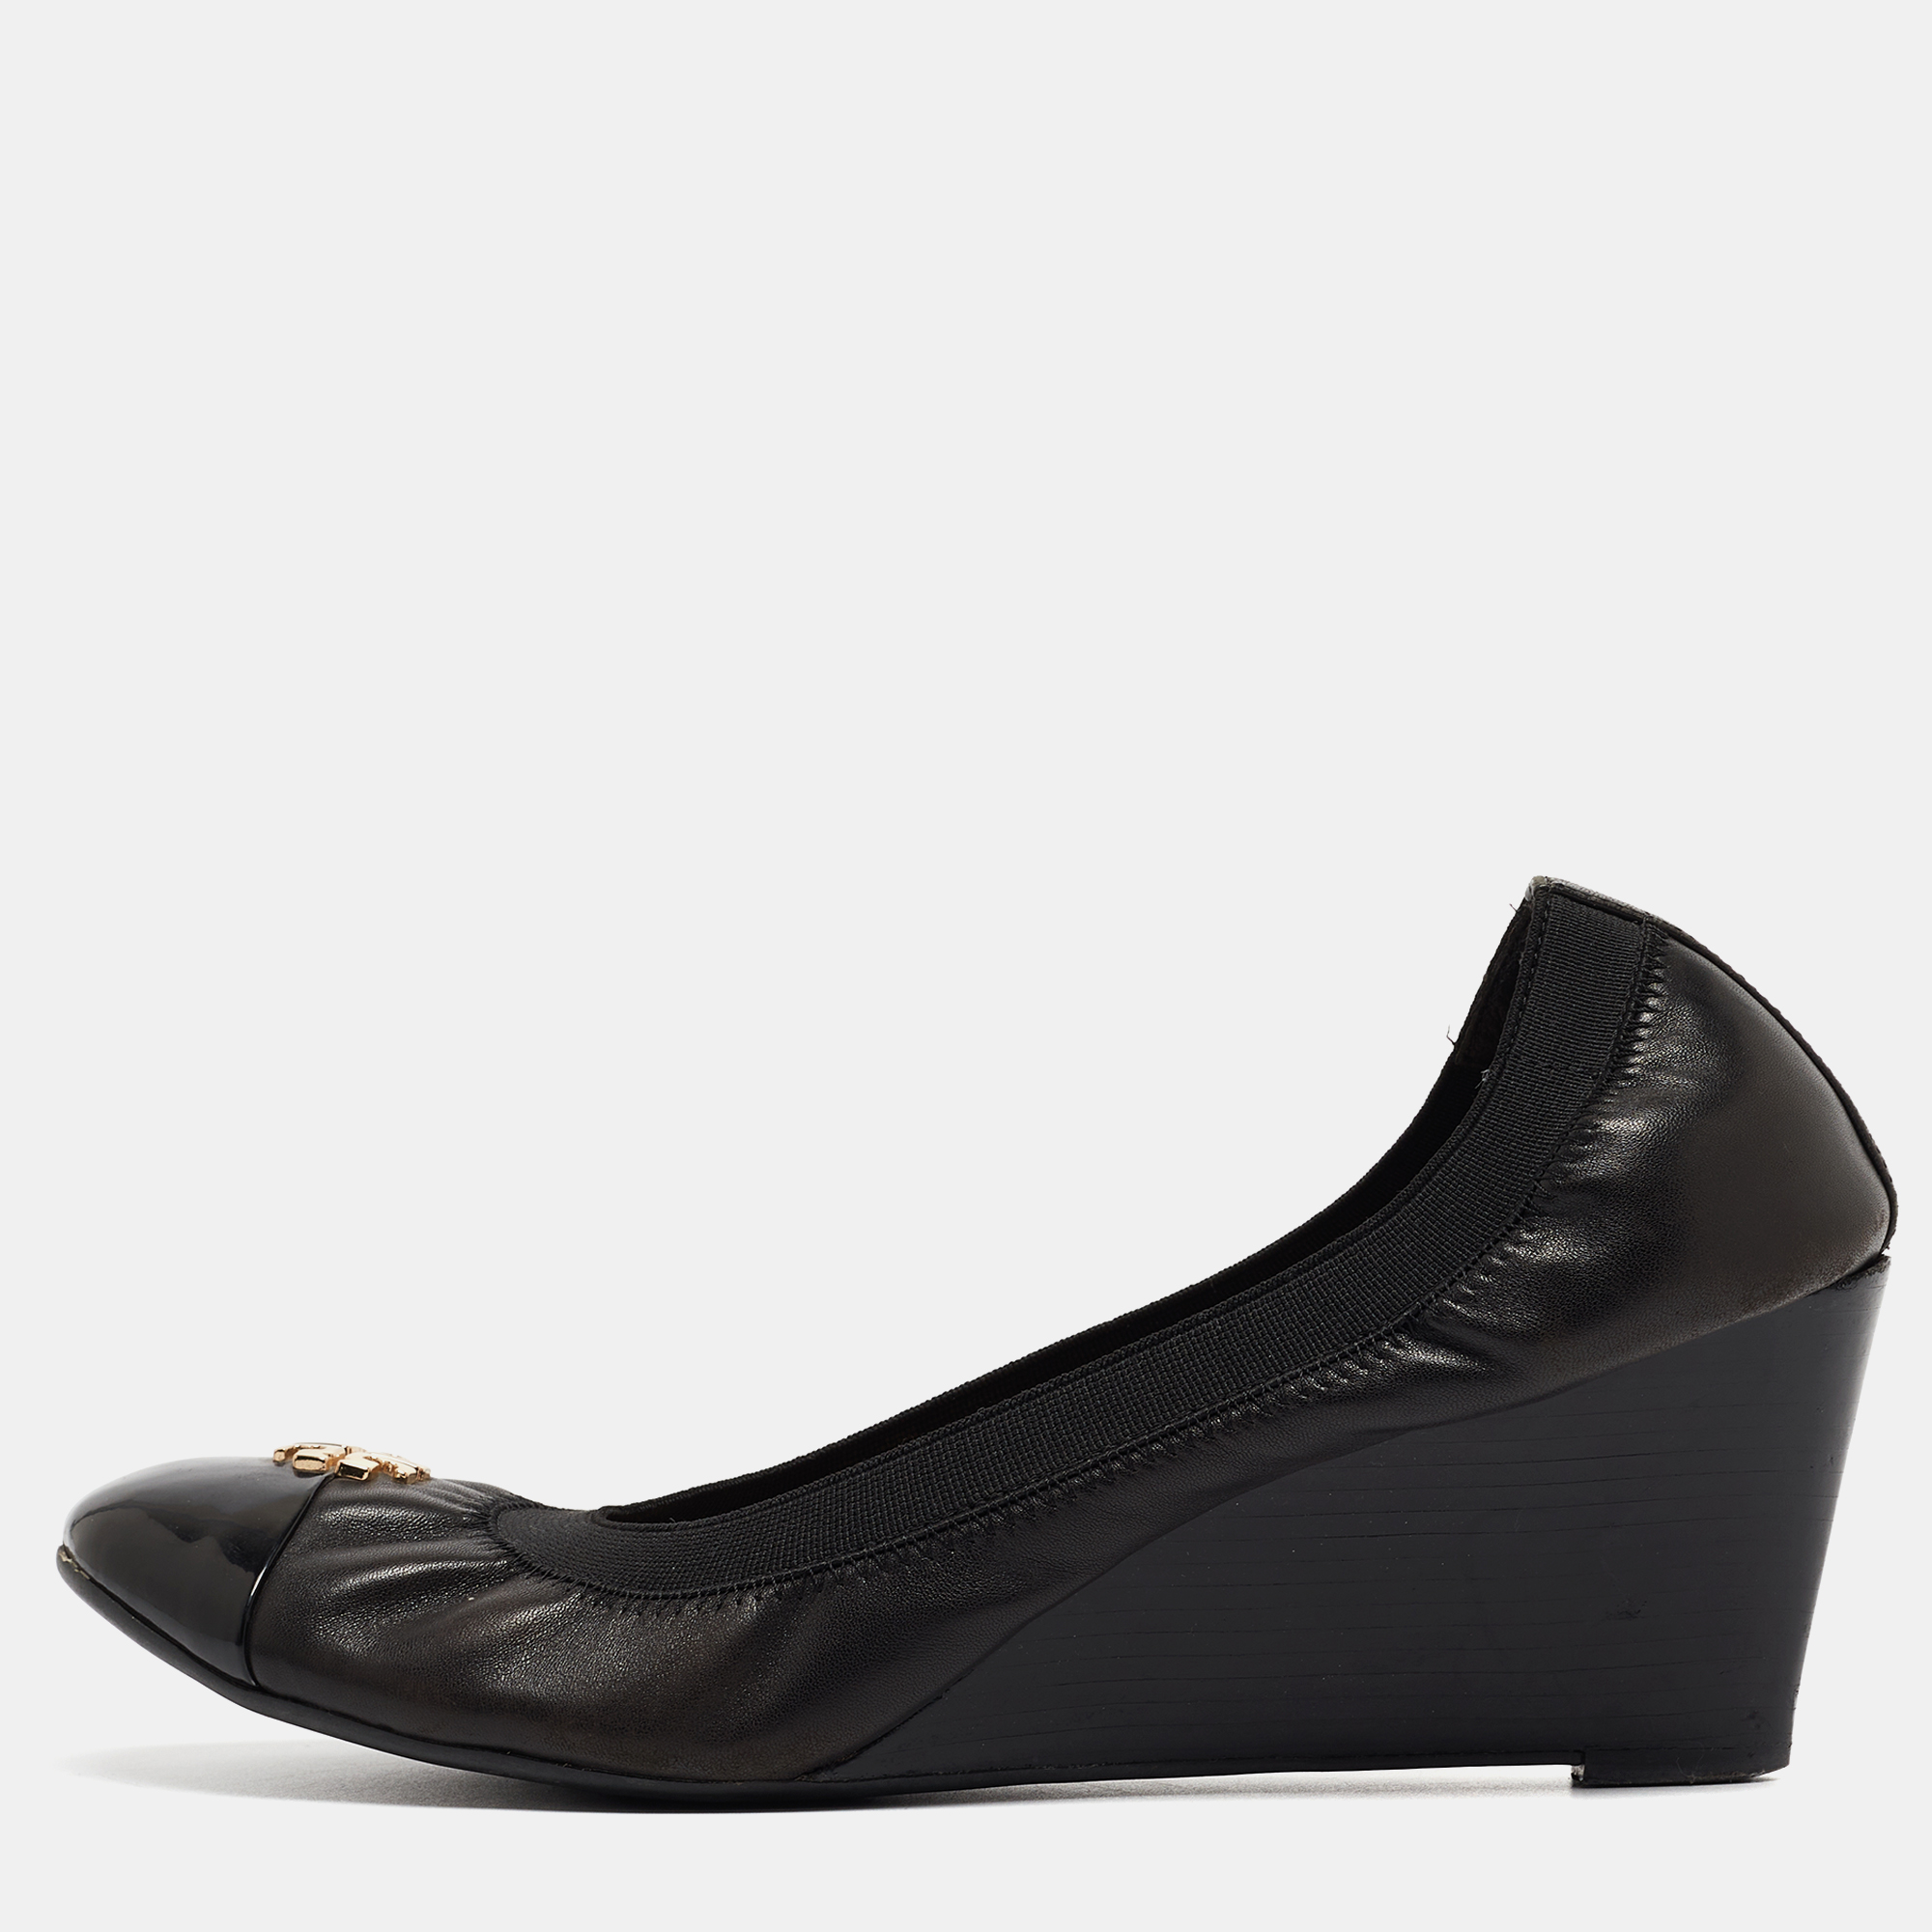 The fashion house's tradition of excellence coupled with modern design sensibilities works to make these wedge pumps a fabulous choice. Theyll help you deliver a classy look with ease.